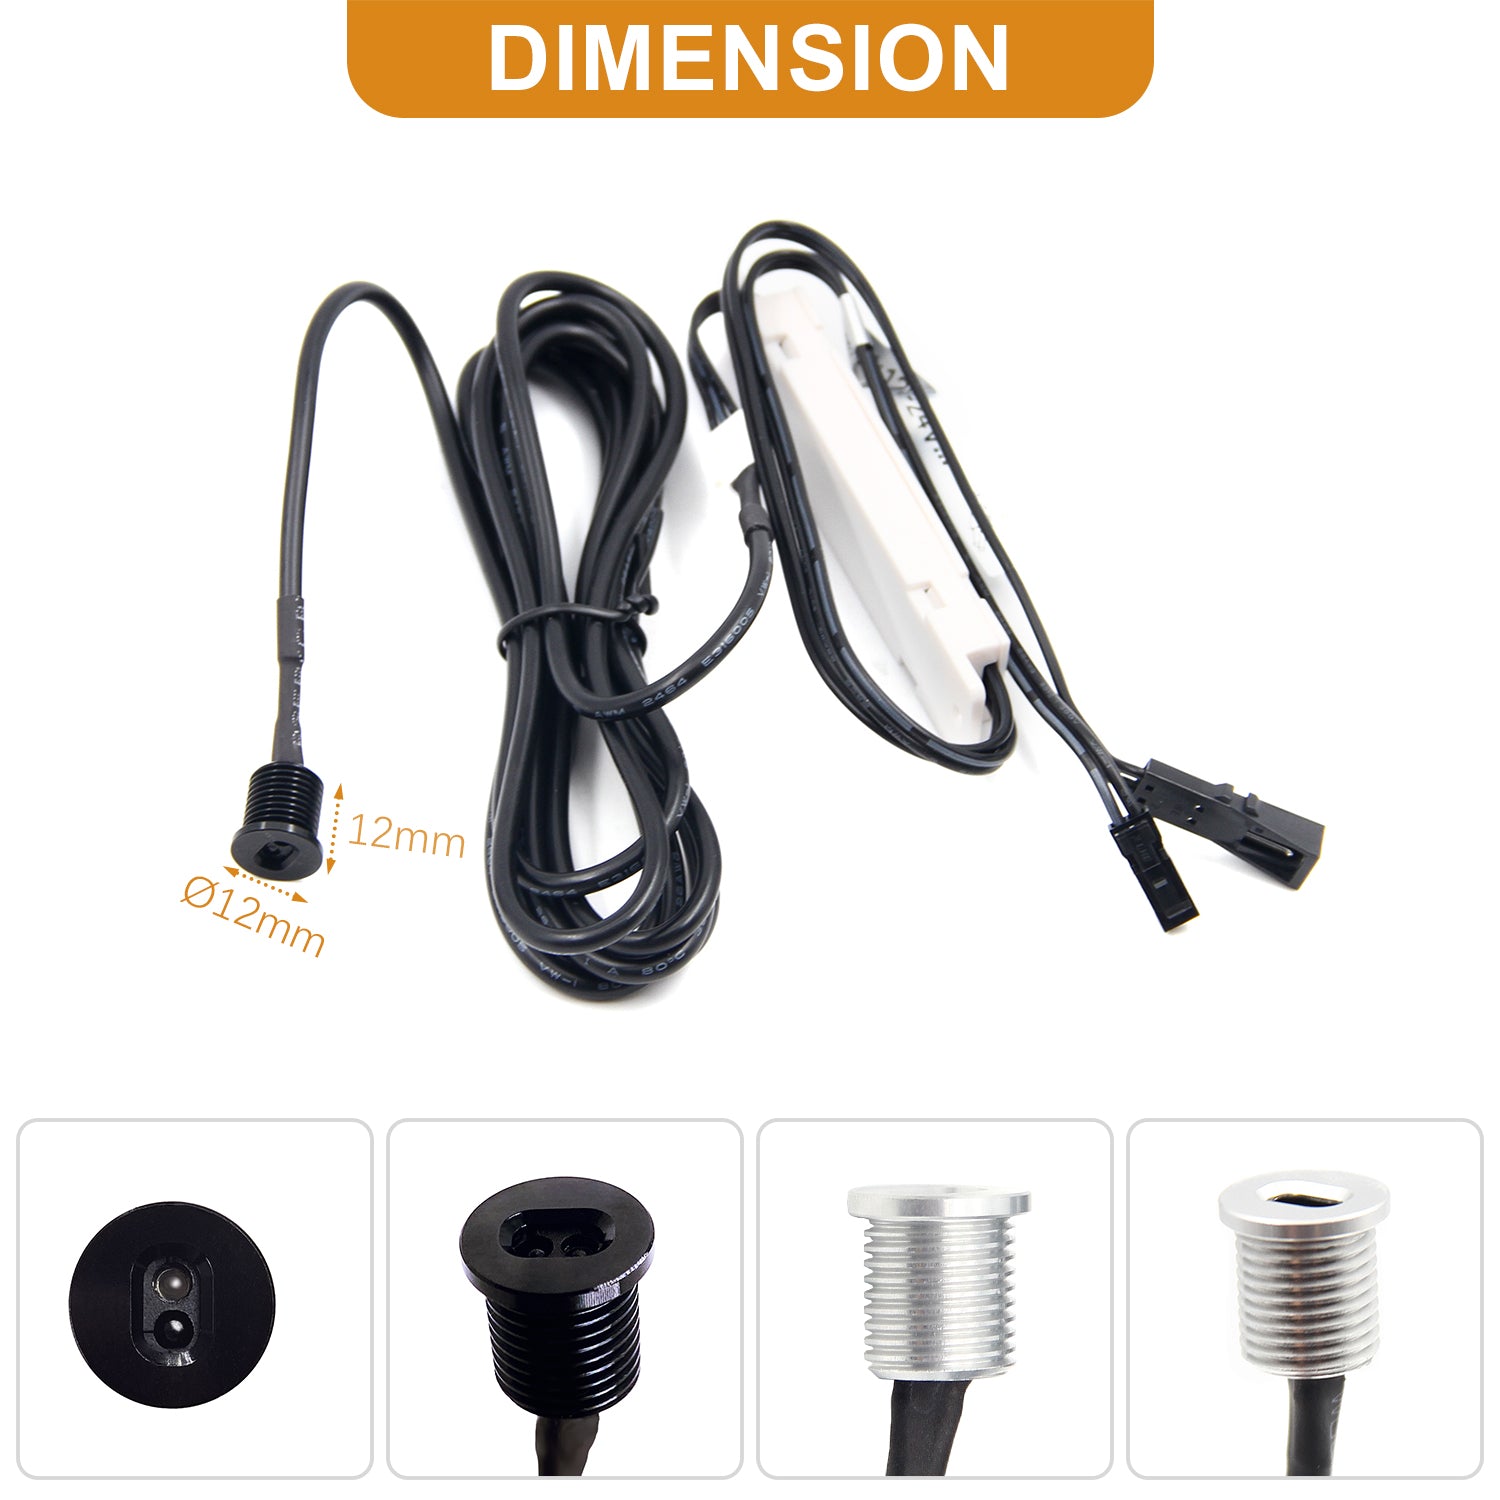 Send inquiry for 12V Door Sensor Switch 30W Recessed Mounted Cabinet Sensor Light Switch to high-quality Door Sensor Switch supplier. Wholesale Cabinet Sensor Light Switch  directly from China Door Sensor Switch manufacturers/exporters. Get a factory sale price list and become a distributor/agent-vstled.com.